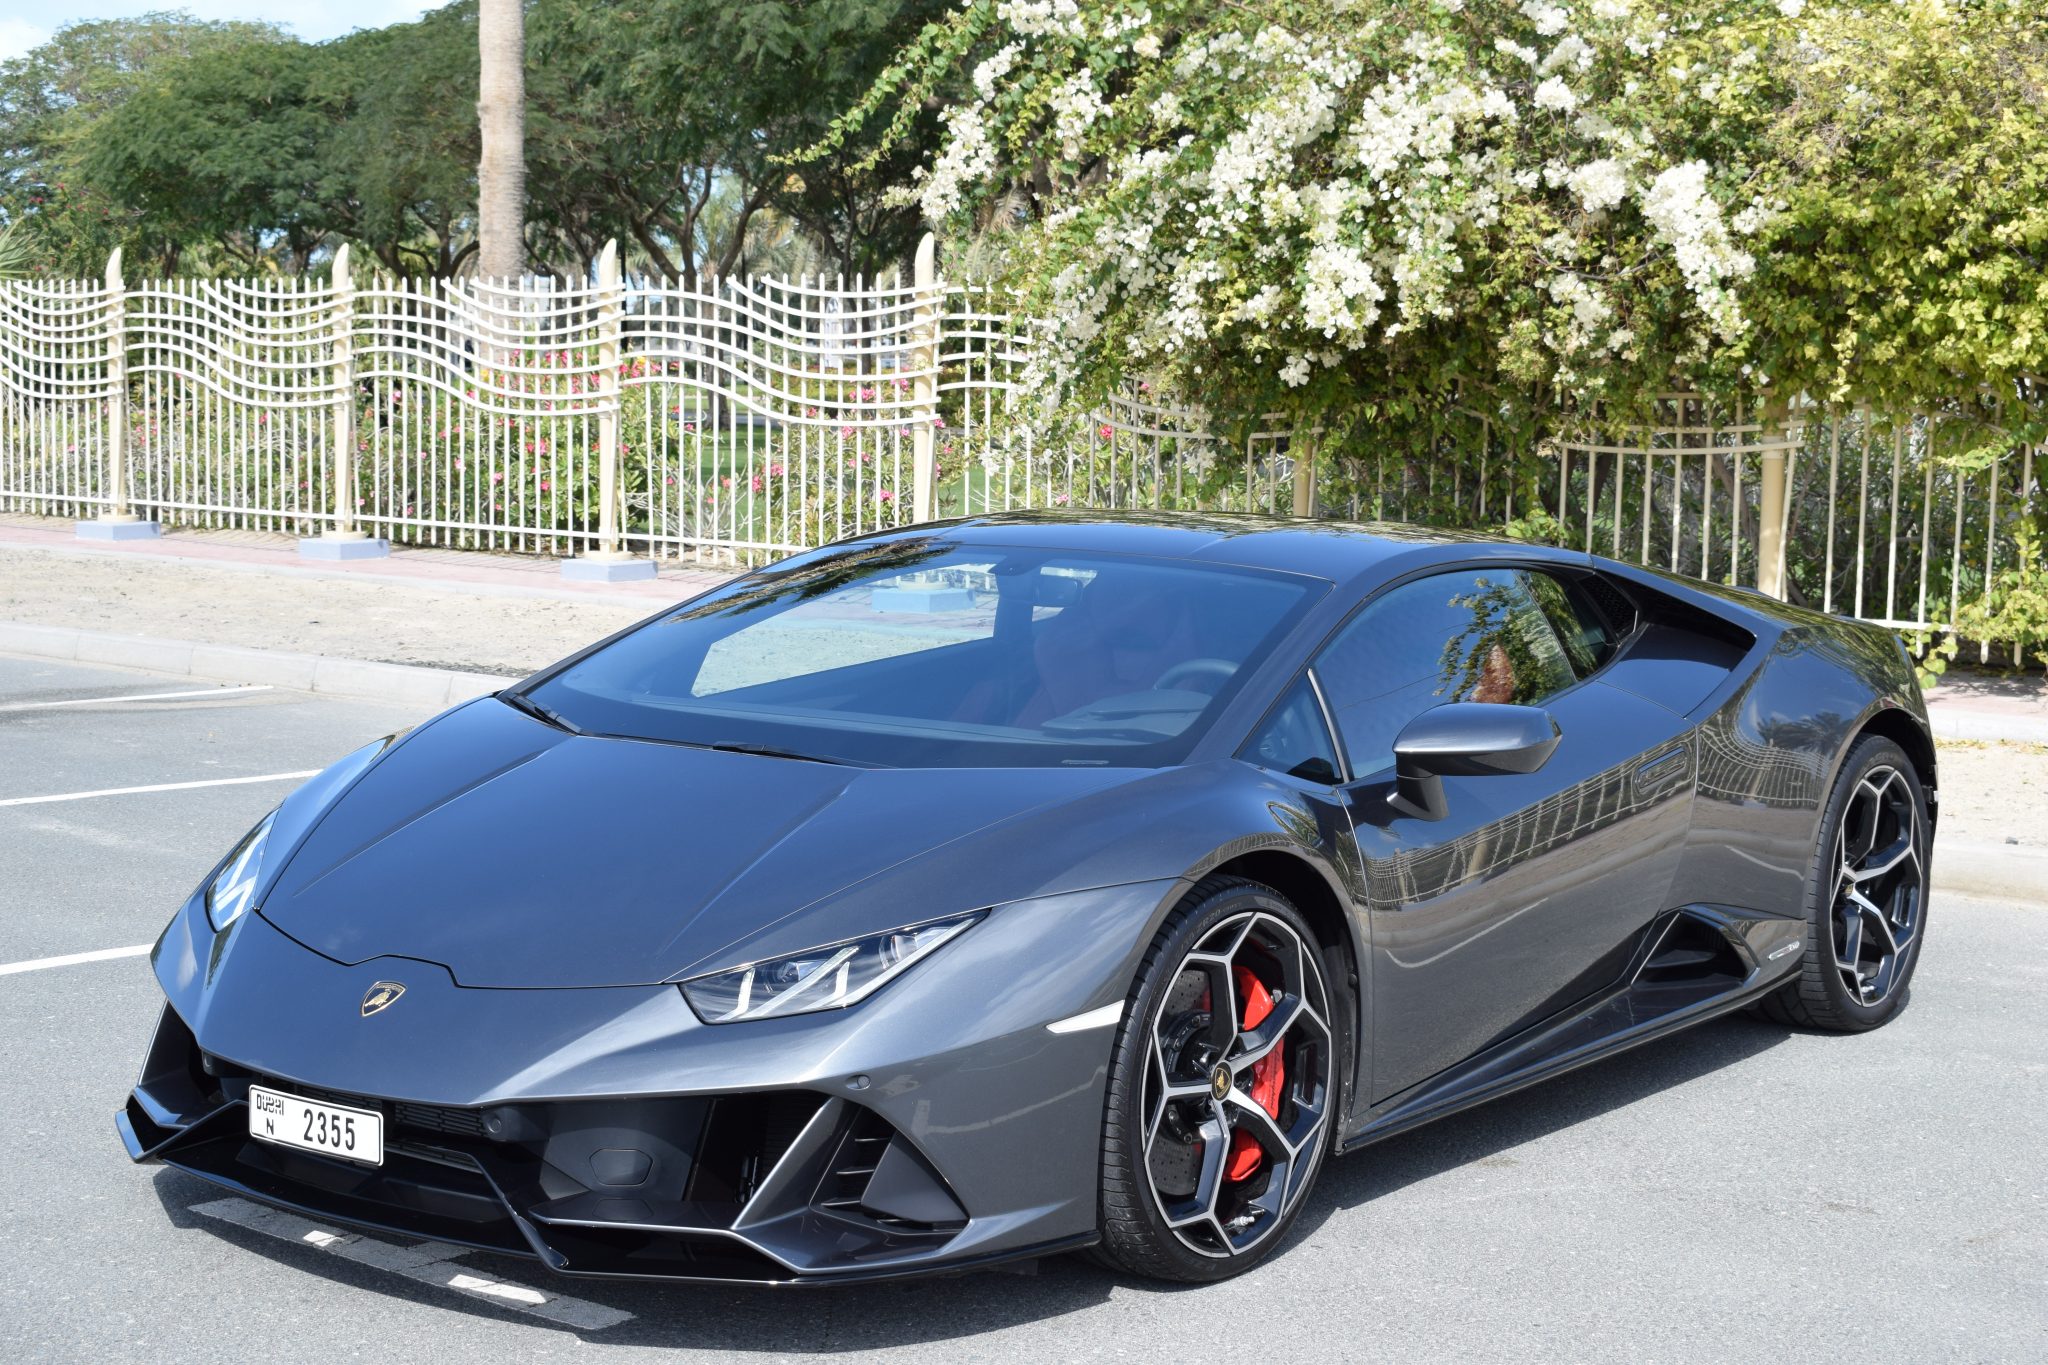 Rent Huracan Evo Black in Dubai Up to 80 OFF Check